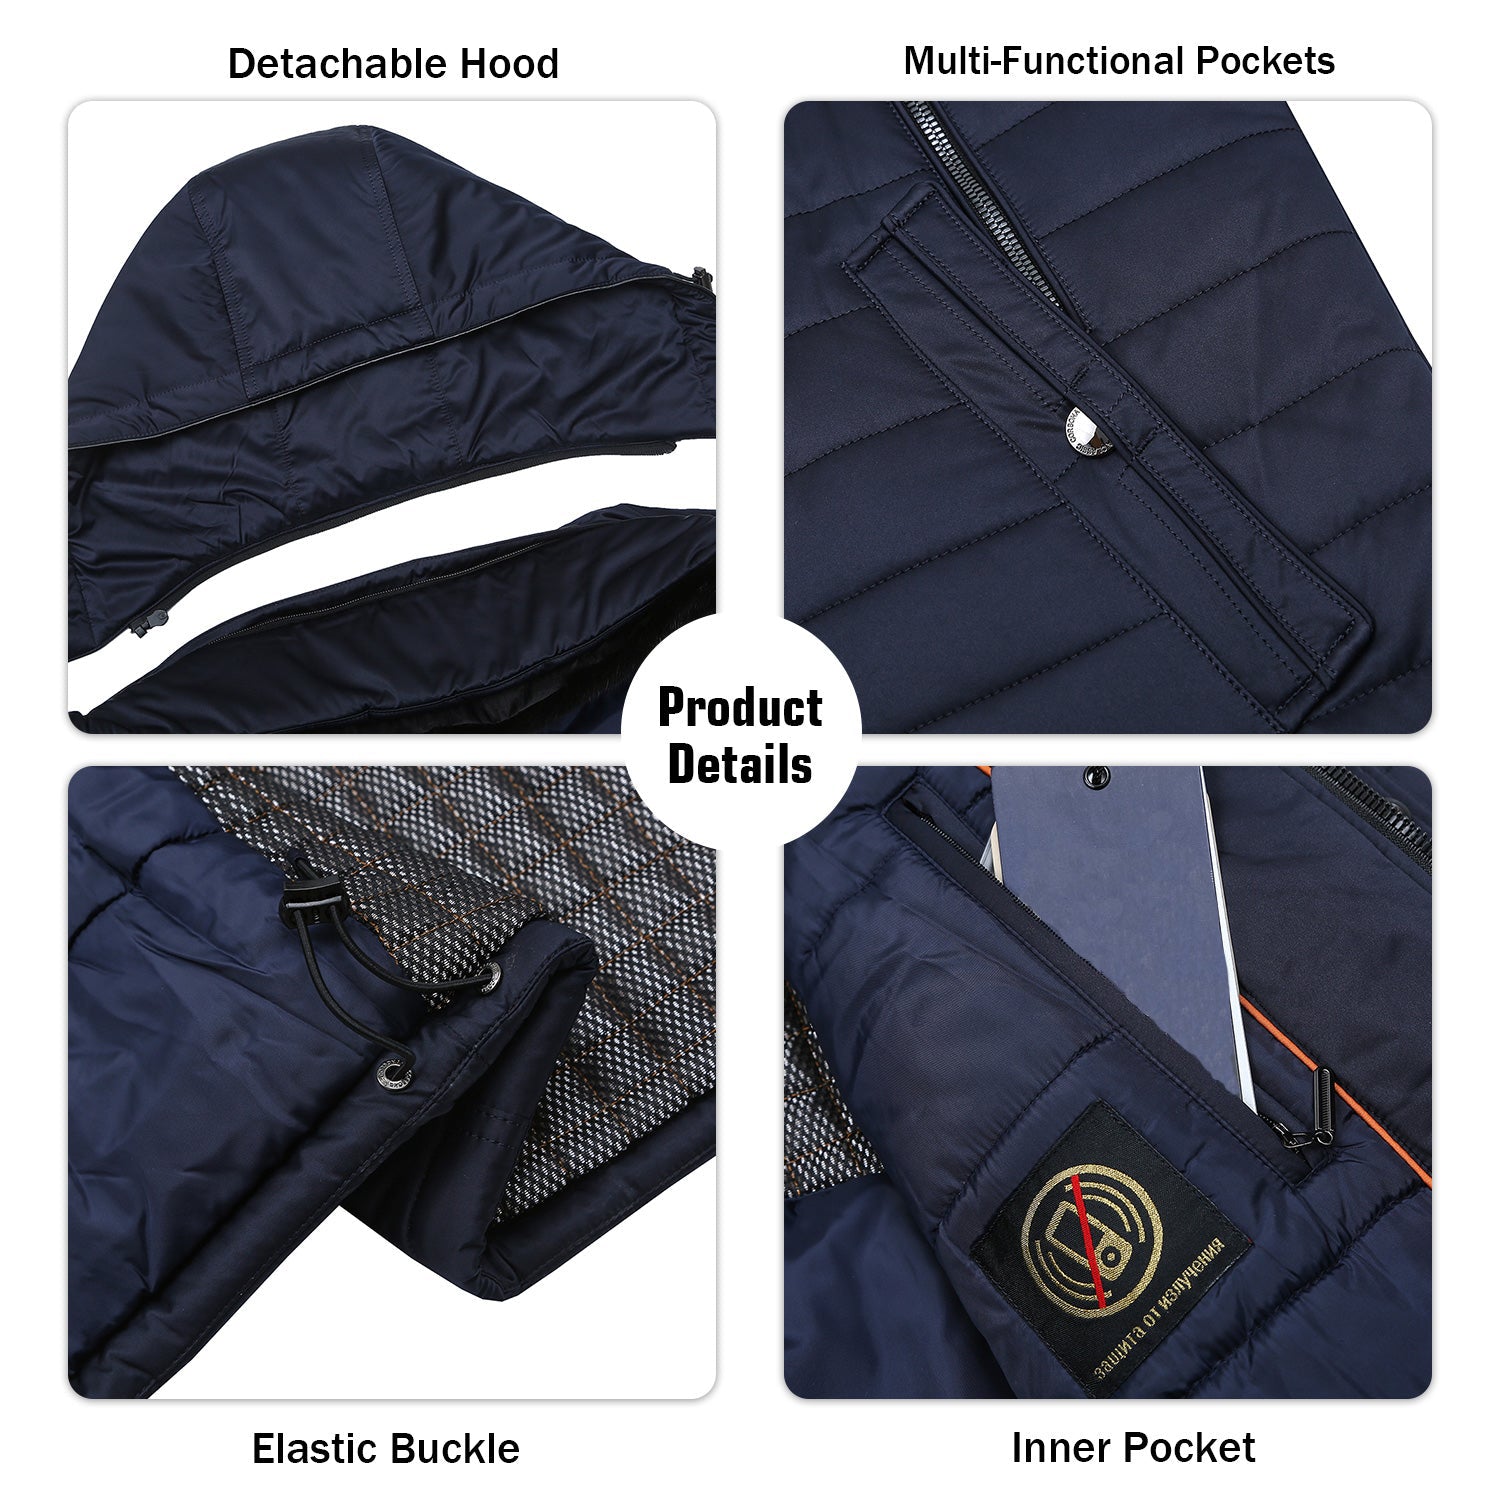 Satin Padded Built-in Thermometer Casual Jacket